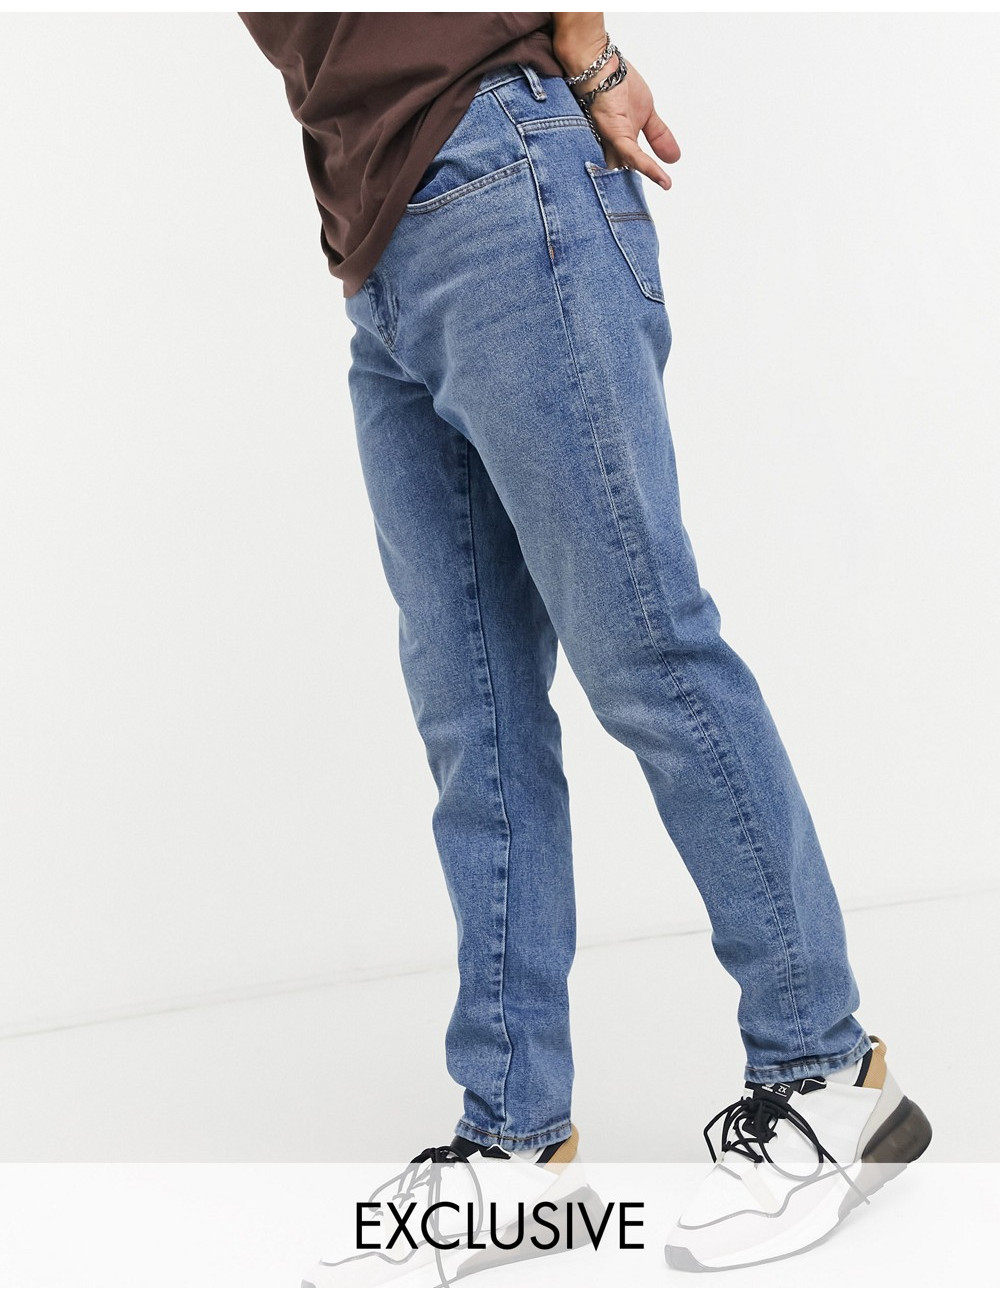 COLLUSION x003 tapered jean...